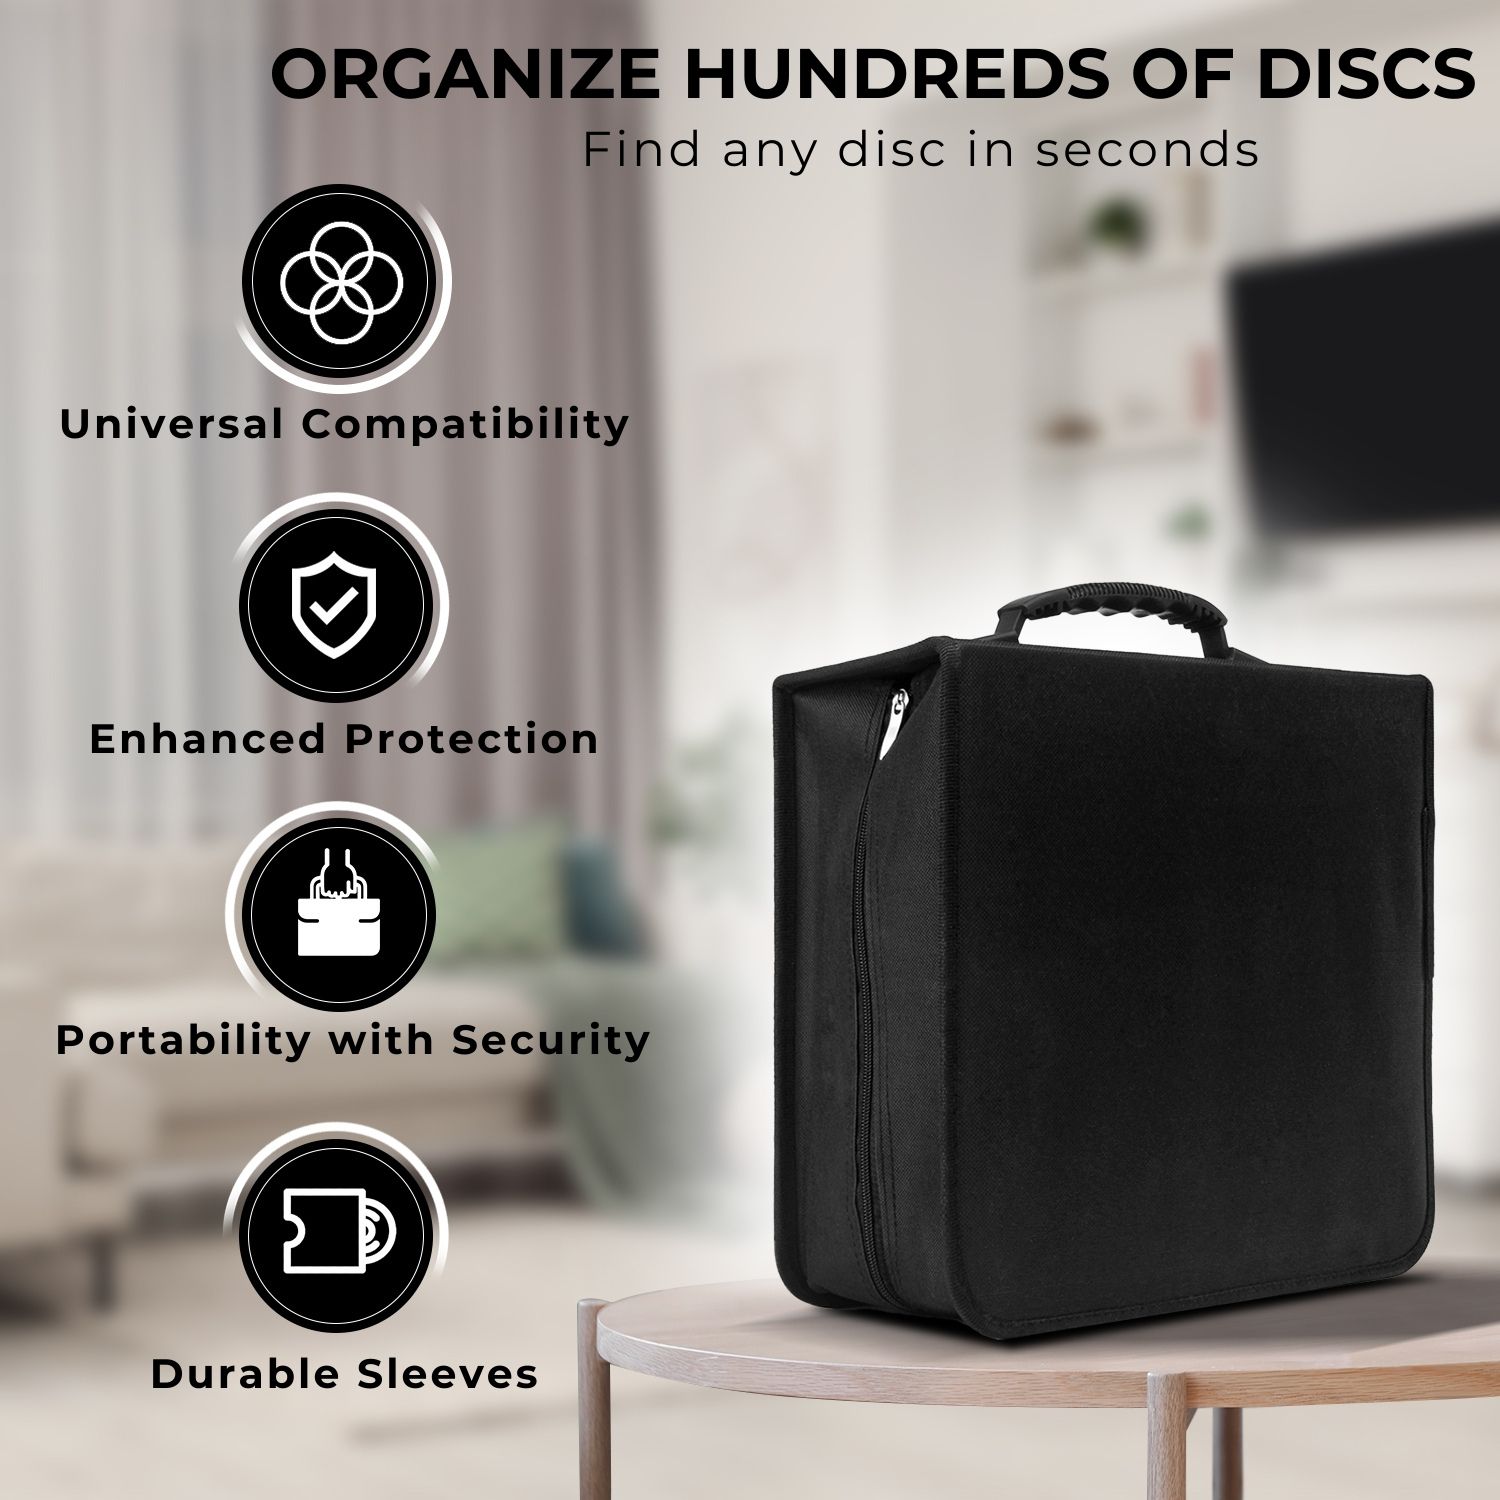 Ultra-Protective CD Storage Case - Made of durable, moisture and tear-resistant Vinyl material, this car cd holder case will keep your favorites safe and shielded from scratch in storage or when you're on the go